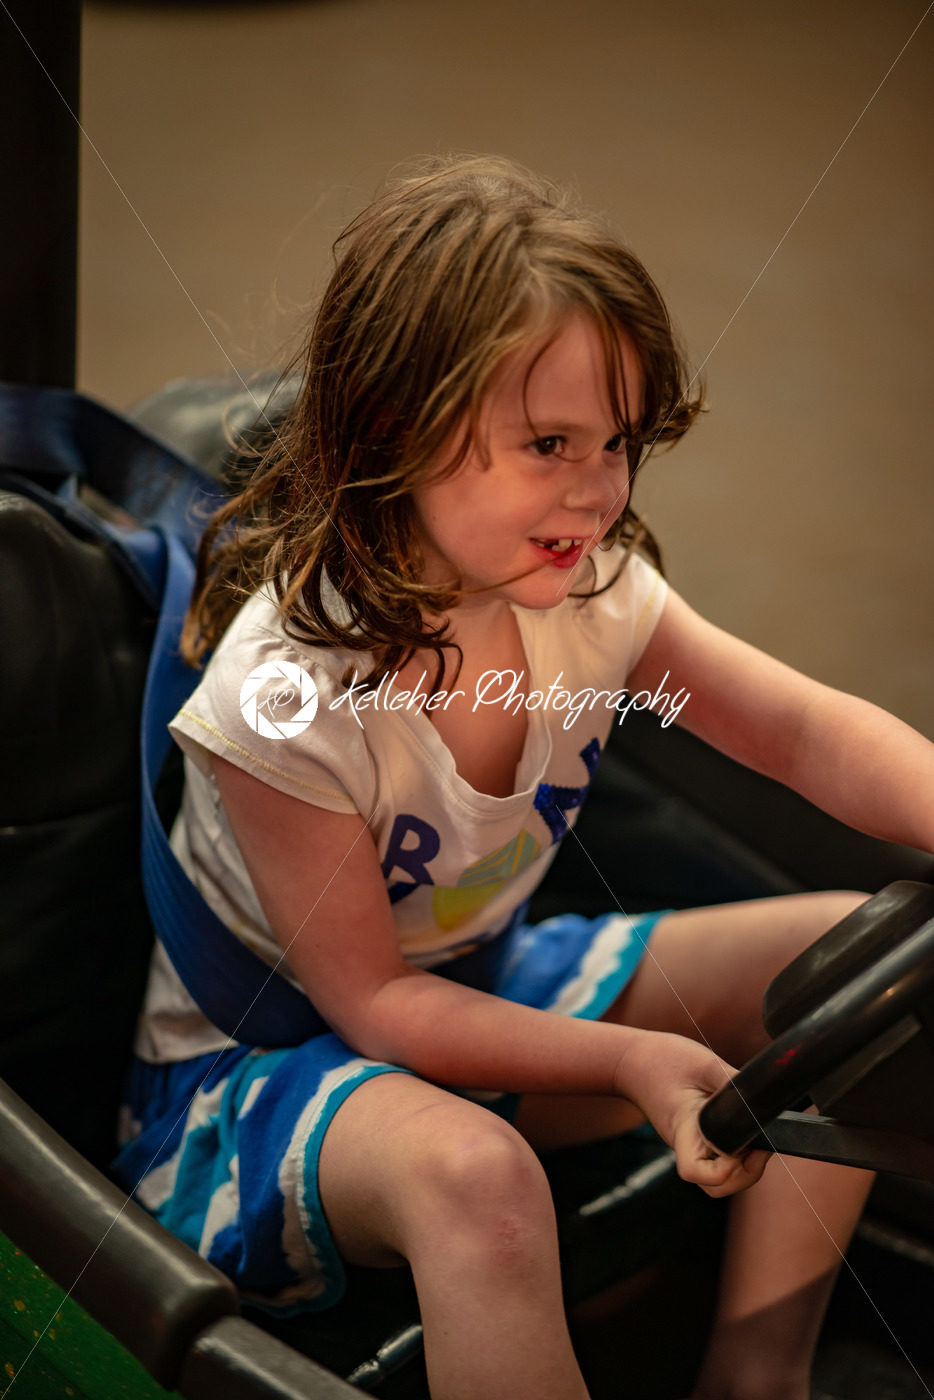 Happy young girl rides electric bumper car amusement ride on shore boardwalk - Kelleher Photography Store